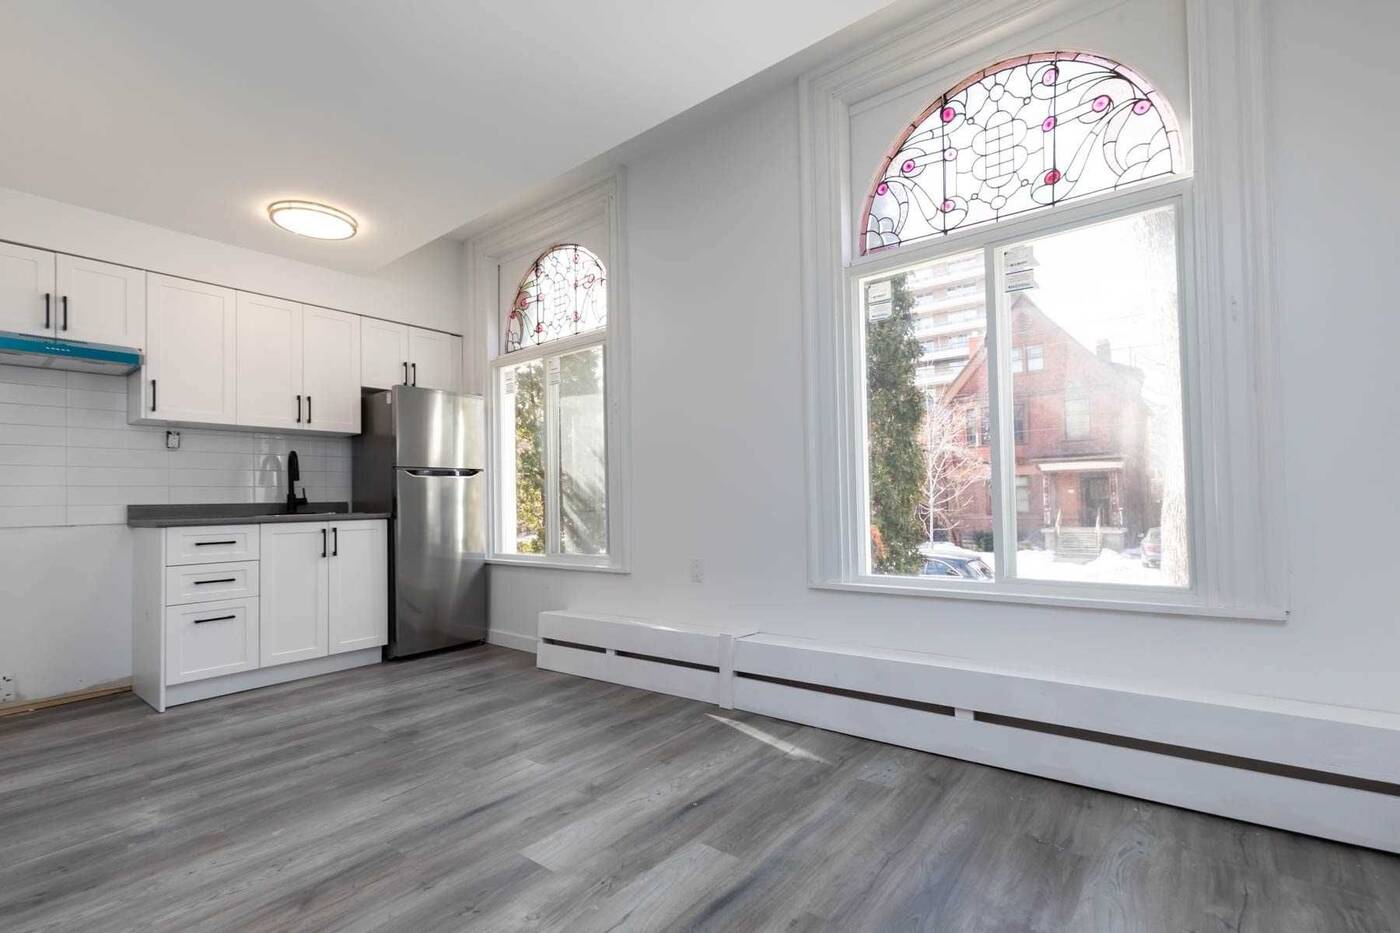 Historic Toronto mansion chopped up into 15 apartments now selling for .4 million